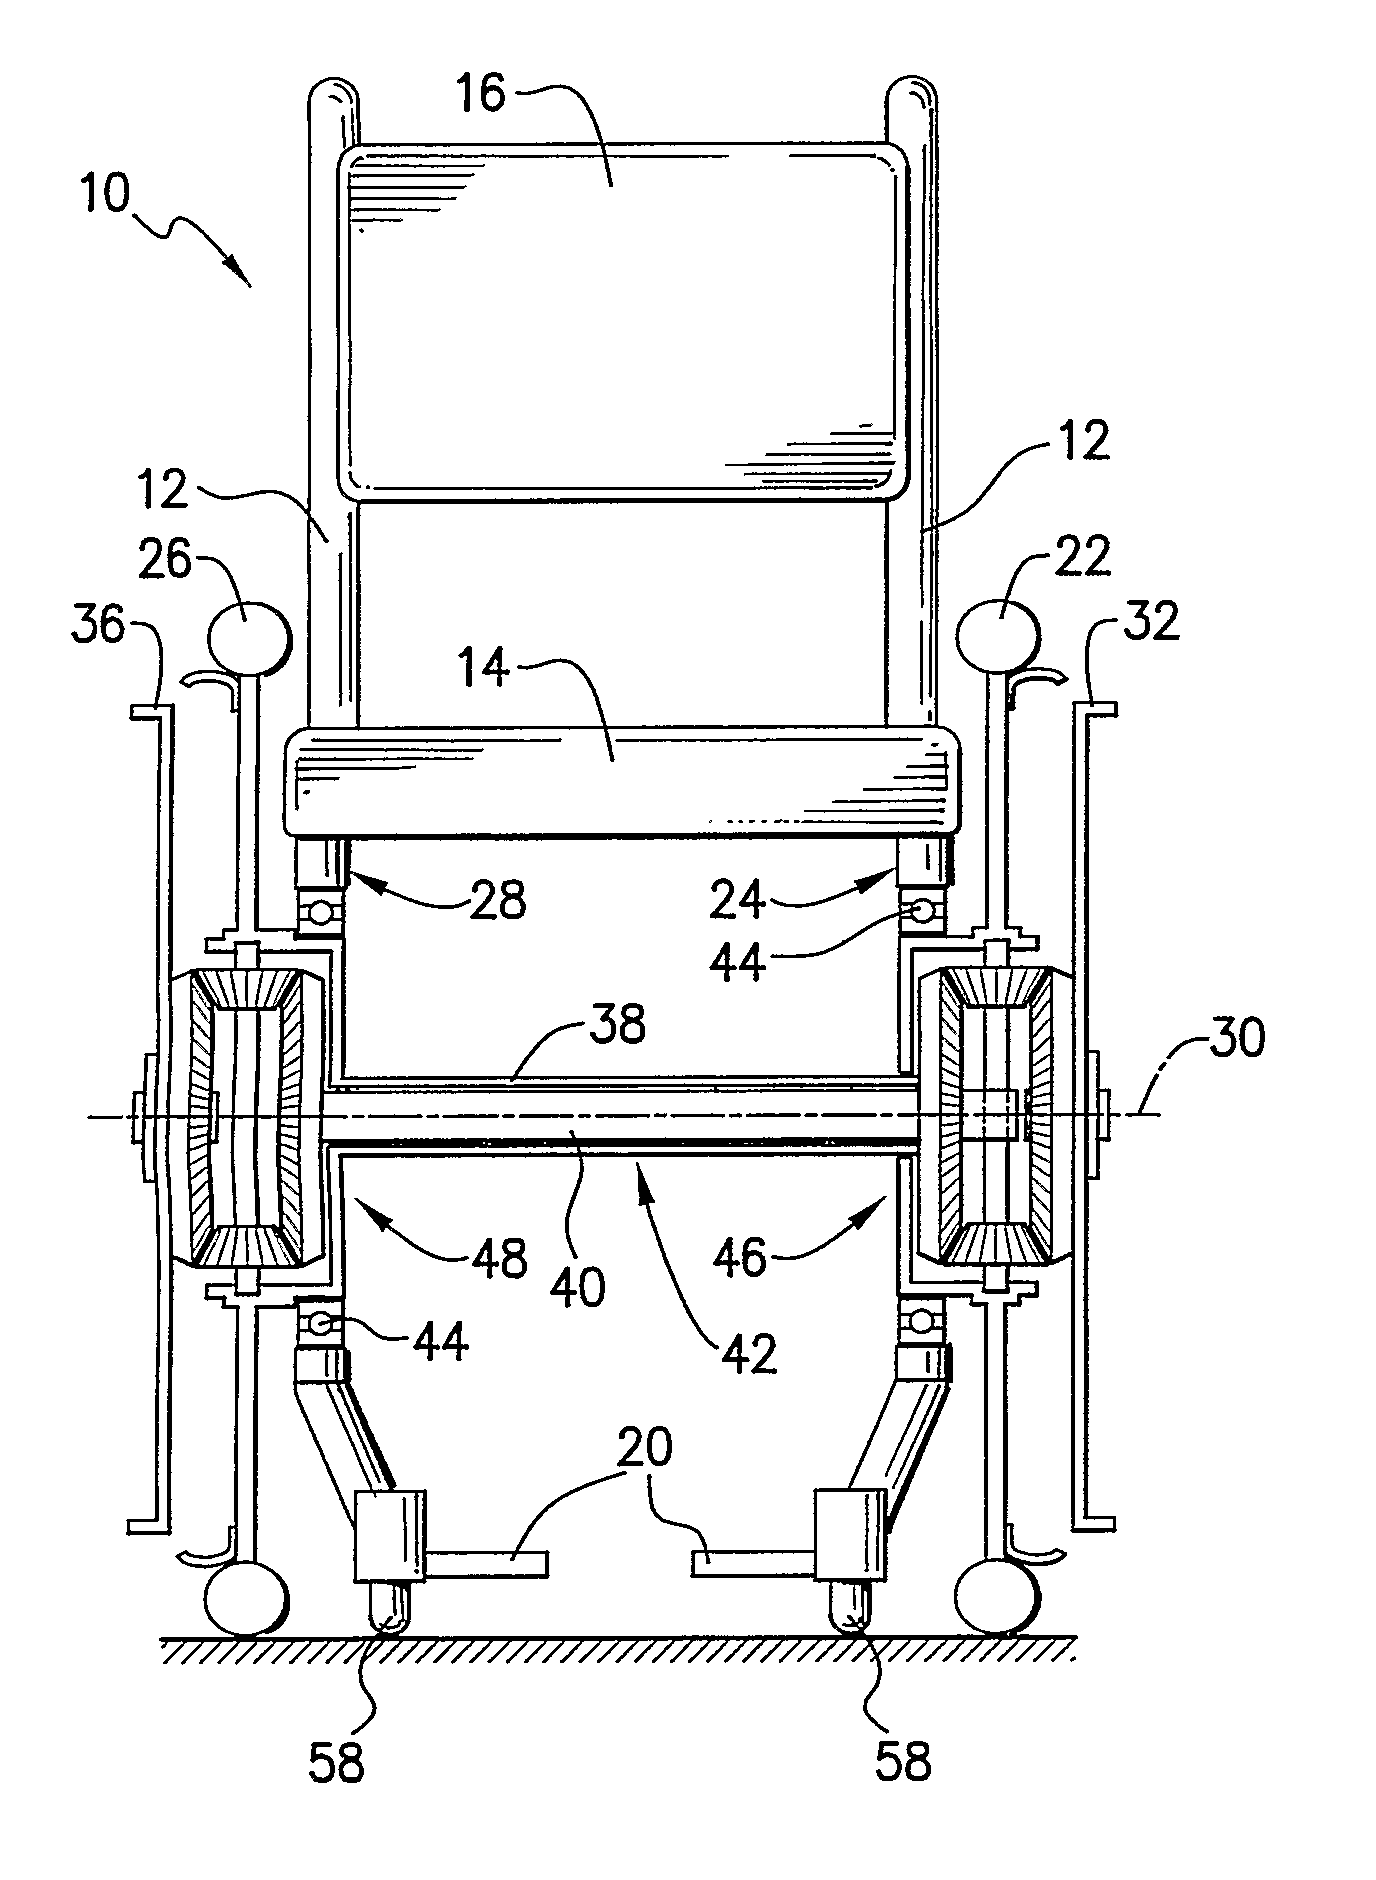 Manually propelled wheelchair device